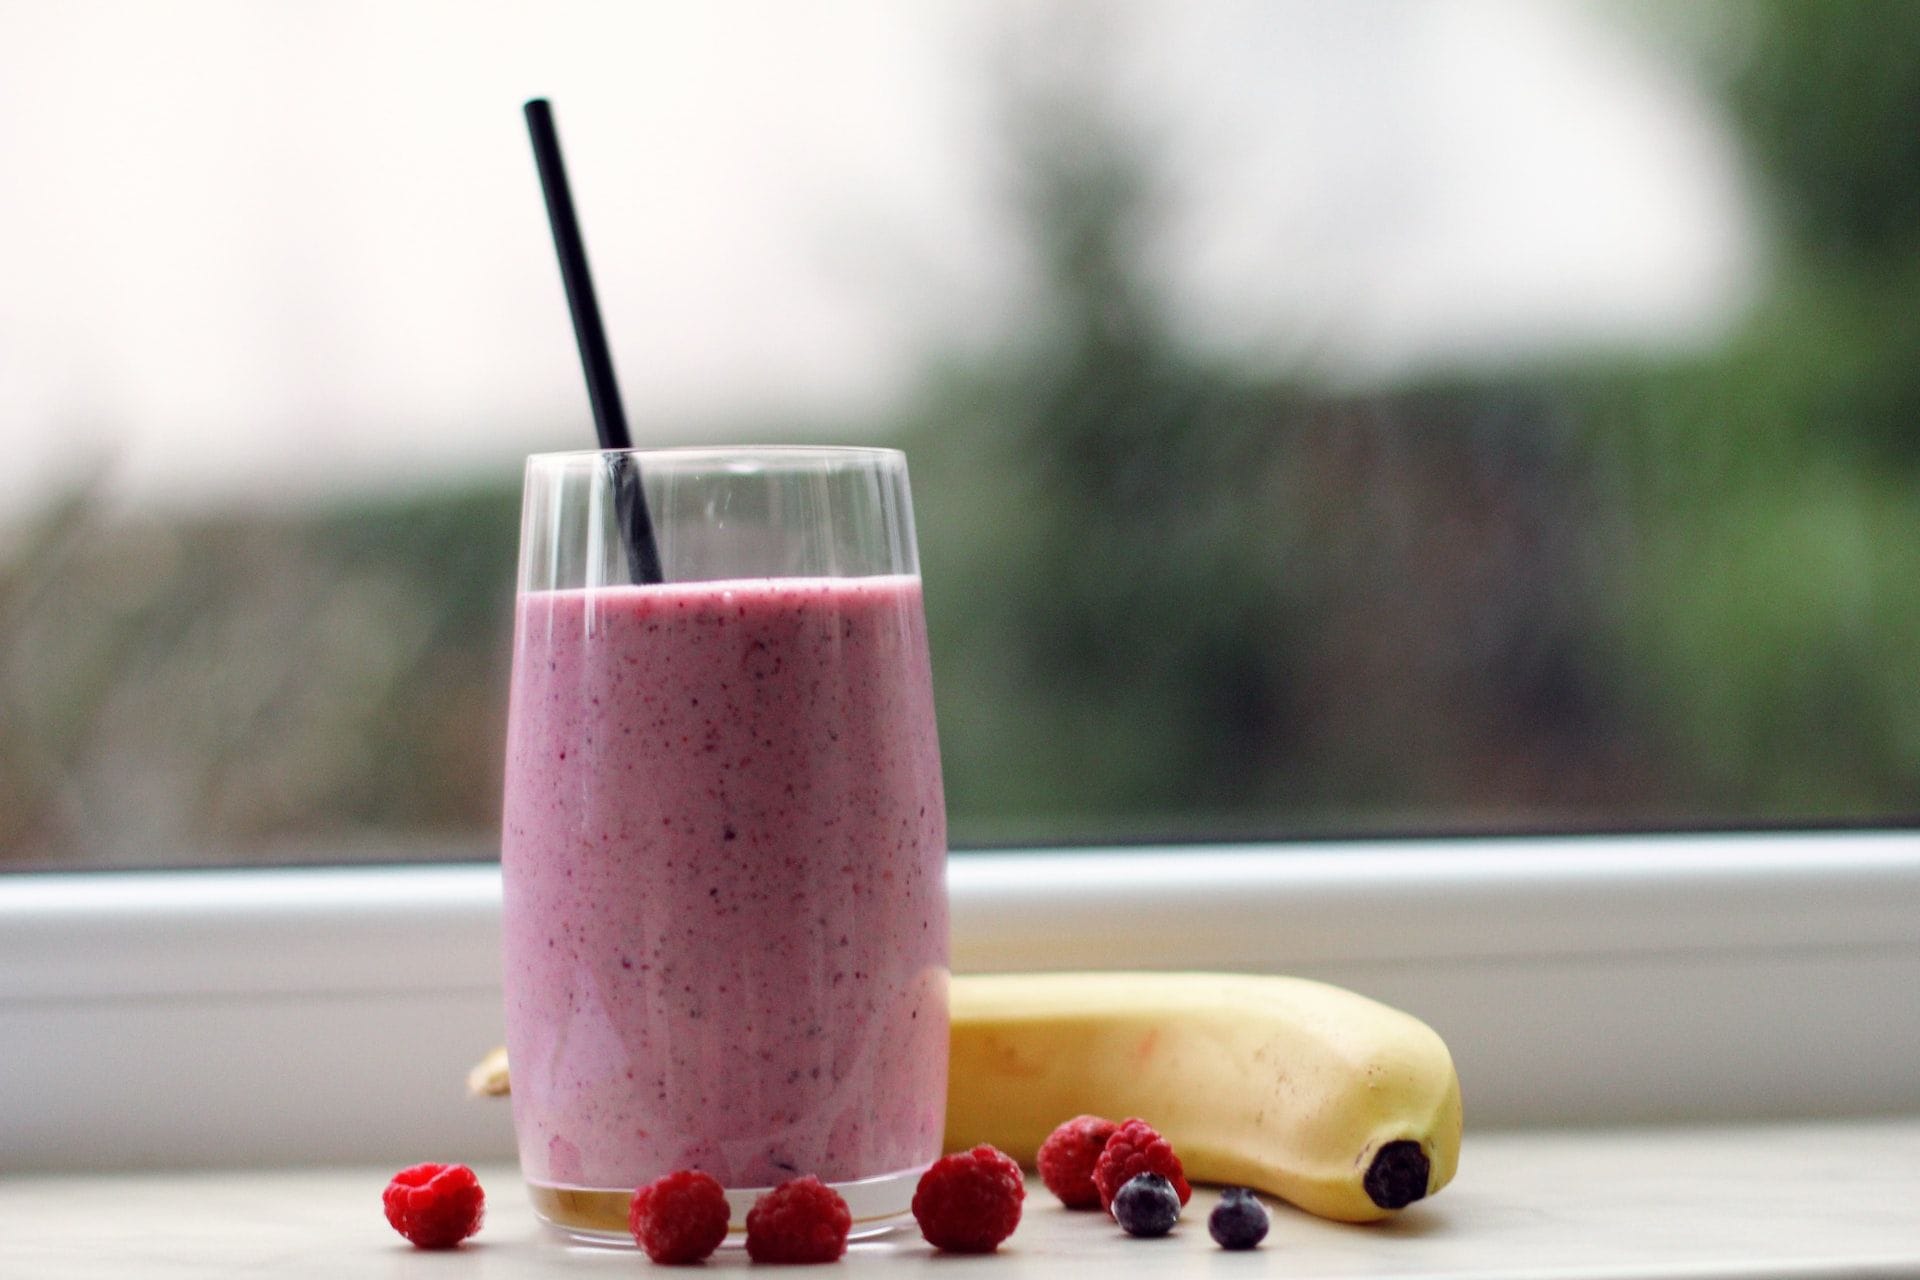 Smoothie as a quick meal when in a rush